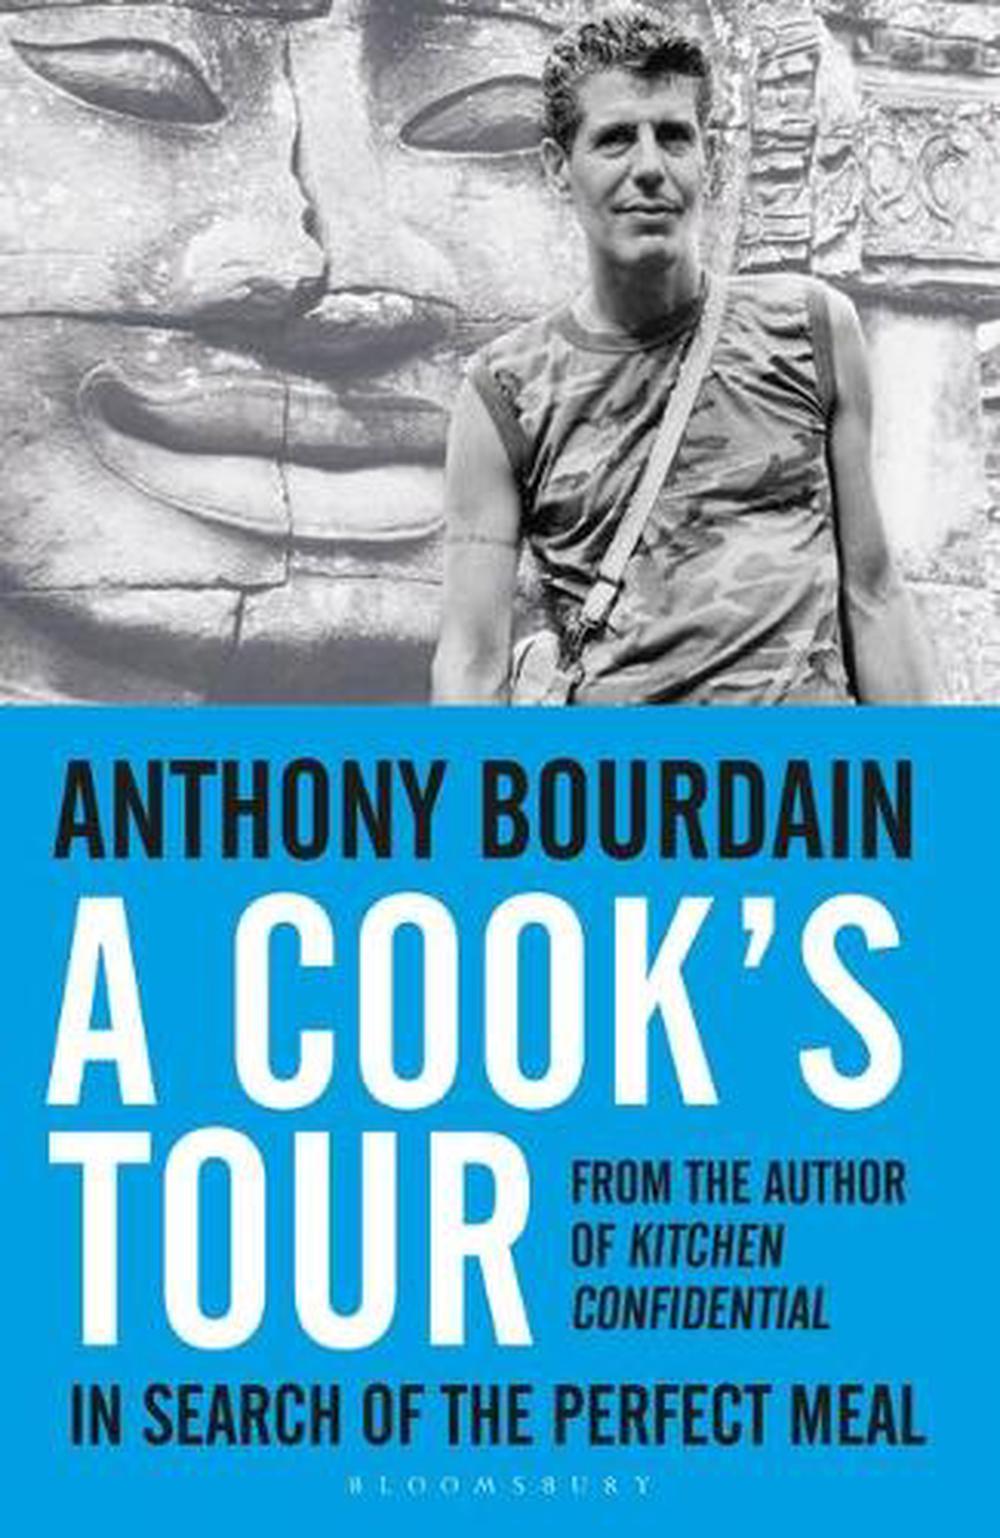 a cook's tour by anthony bourdain